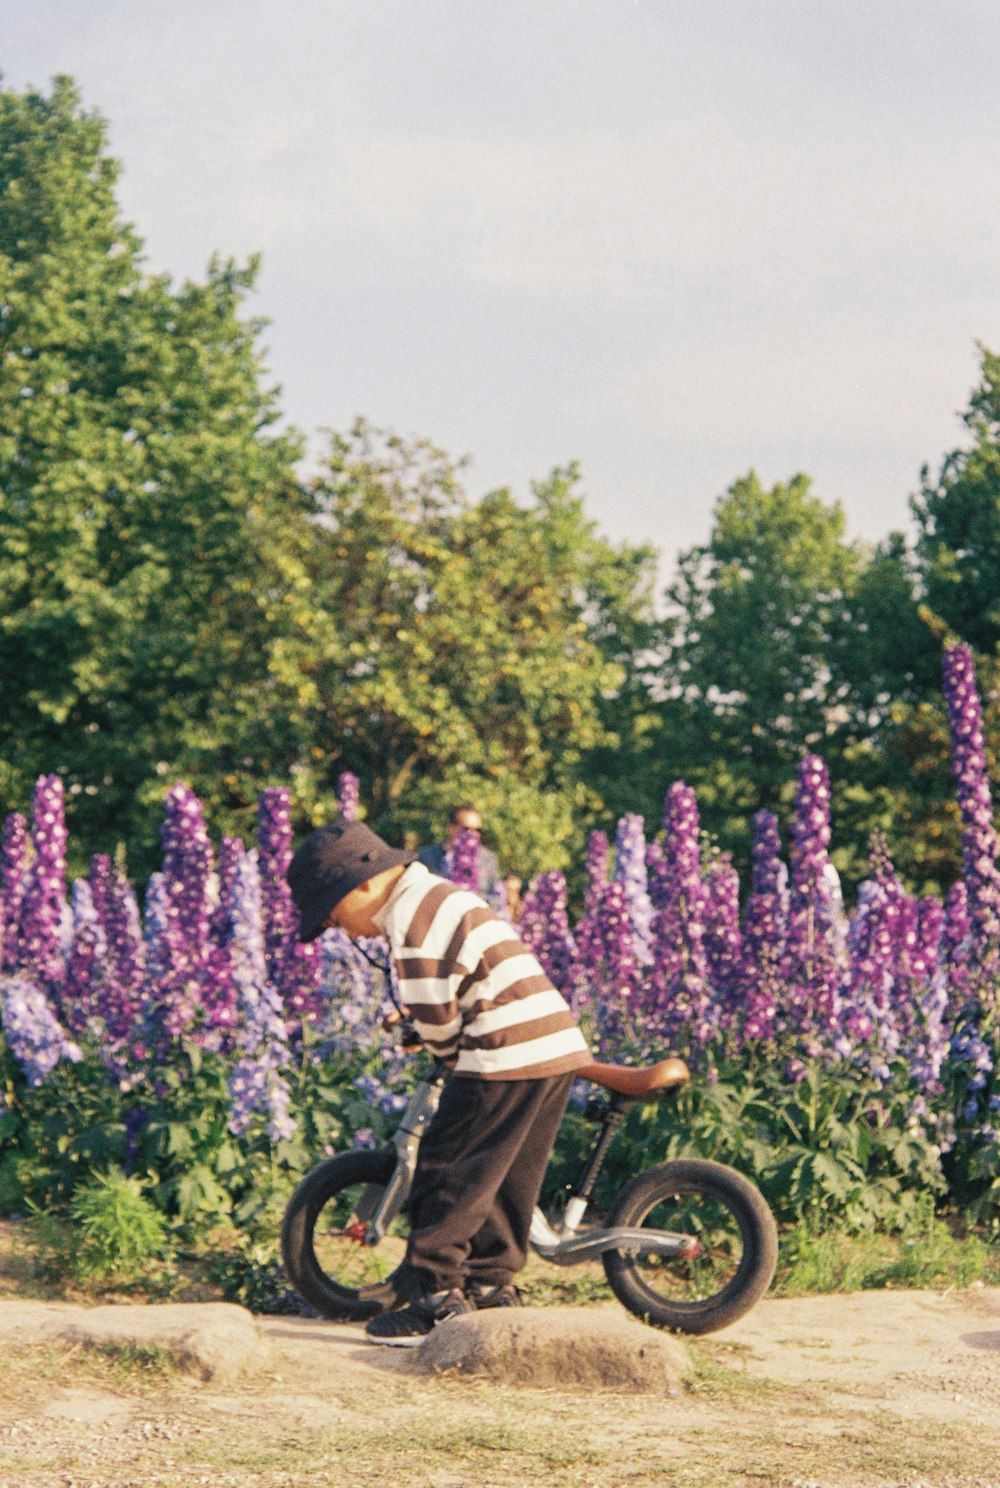 a young boy riding a small bike in a field of flowers